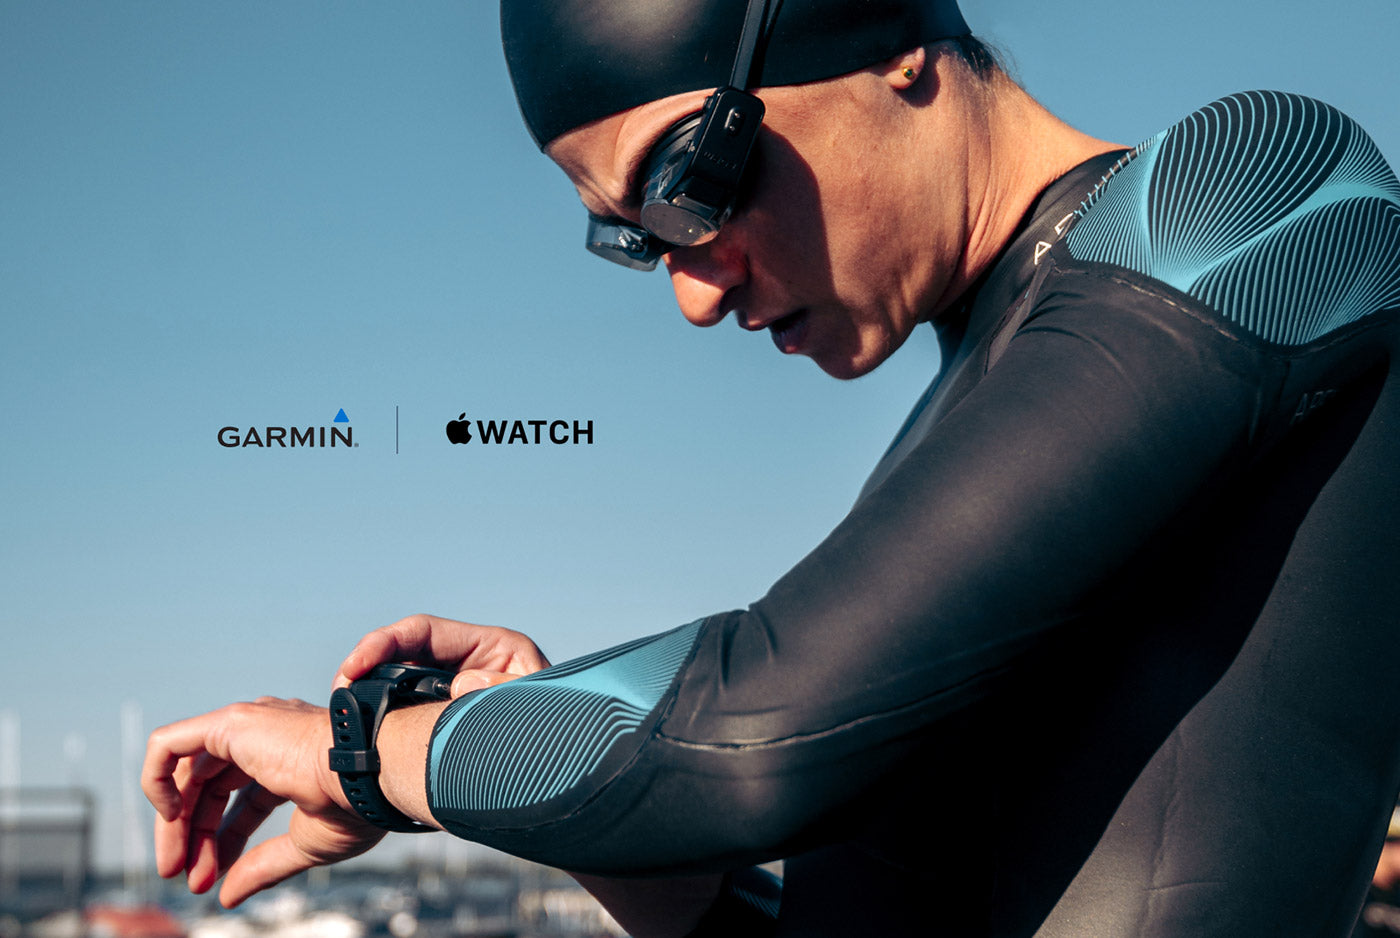 Swimmer checking their watch showing swum, pace, stroke rate data and more in open water swimming.